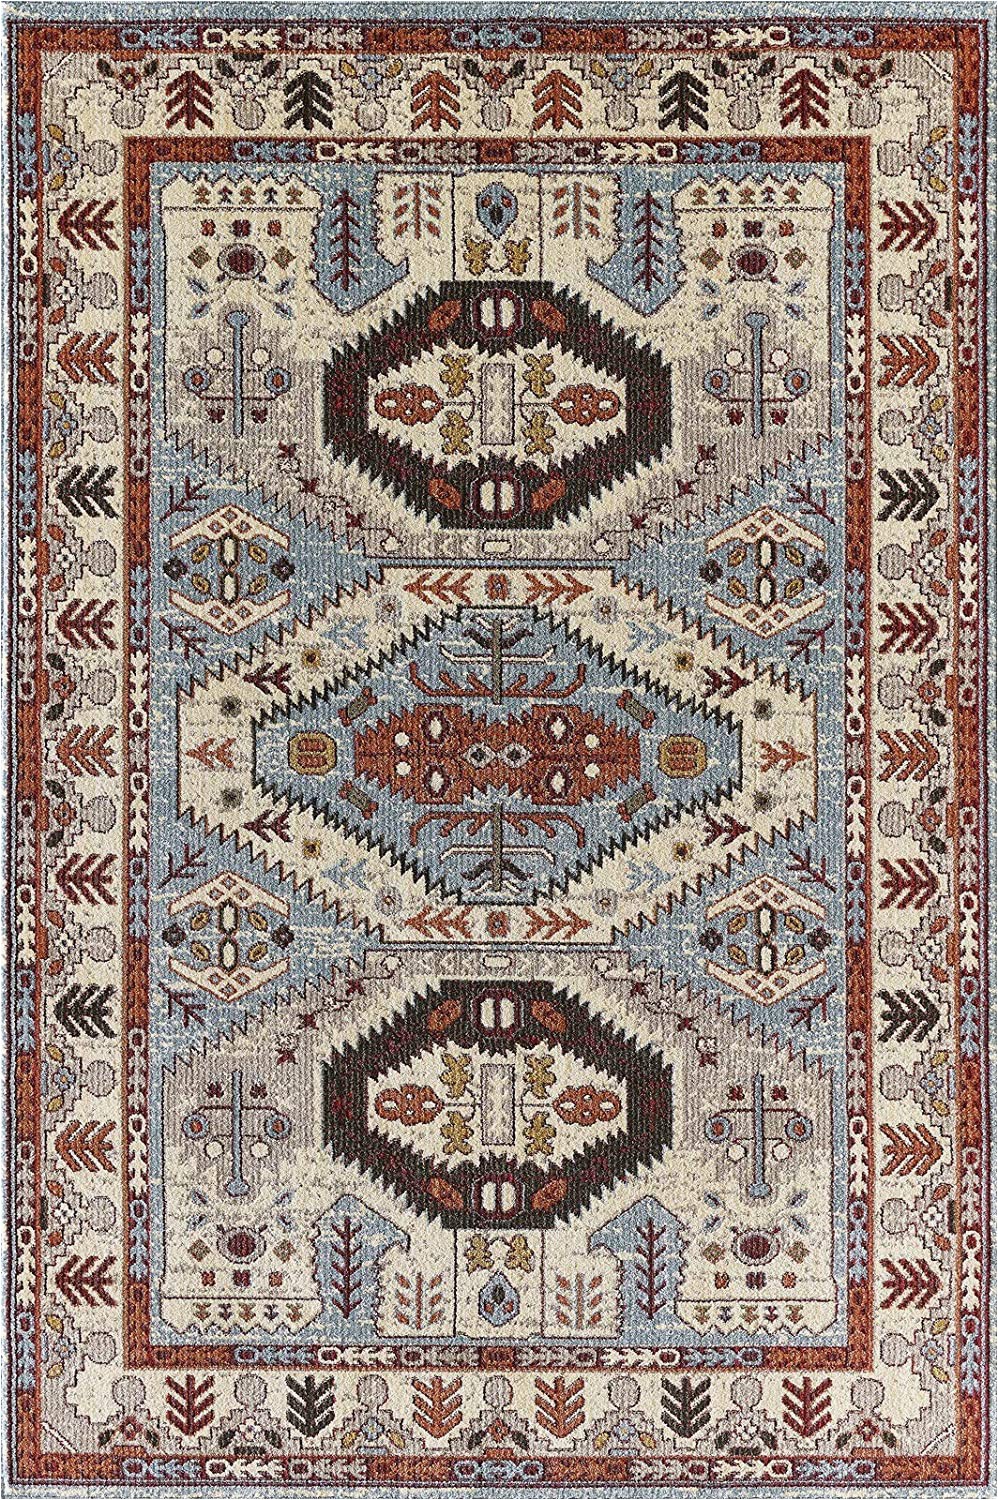 Living Spaces area Rugs 5×7 Glory Rugs area Rug Tribal Marisela Vintage south West Carpet Traditional Texture for Bedroom Living Dining Room 7316 Gabbeh Collection 5×7